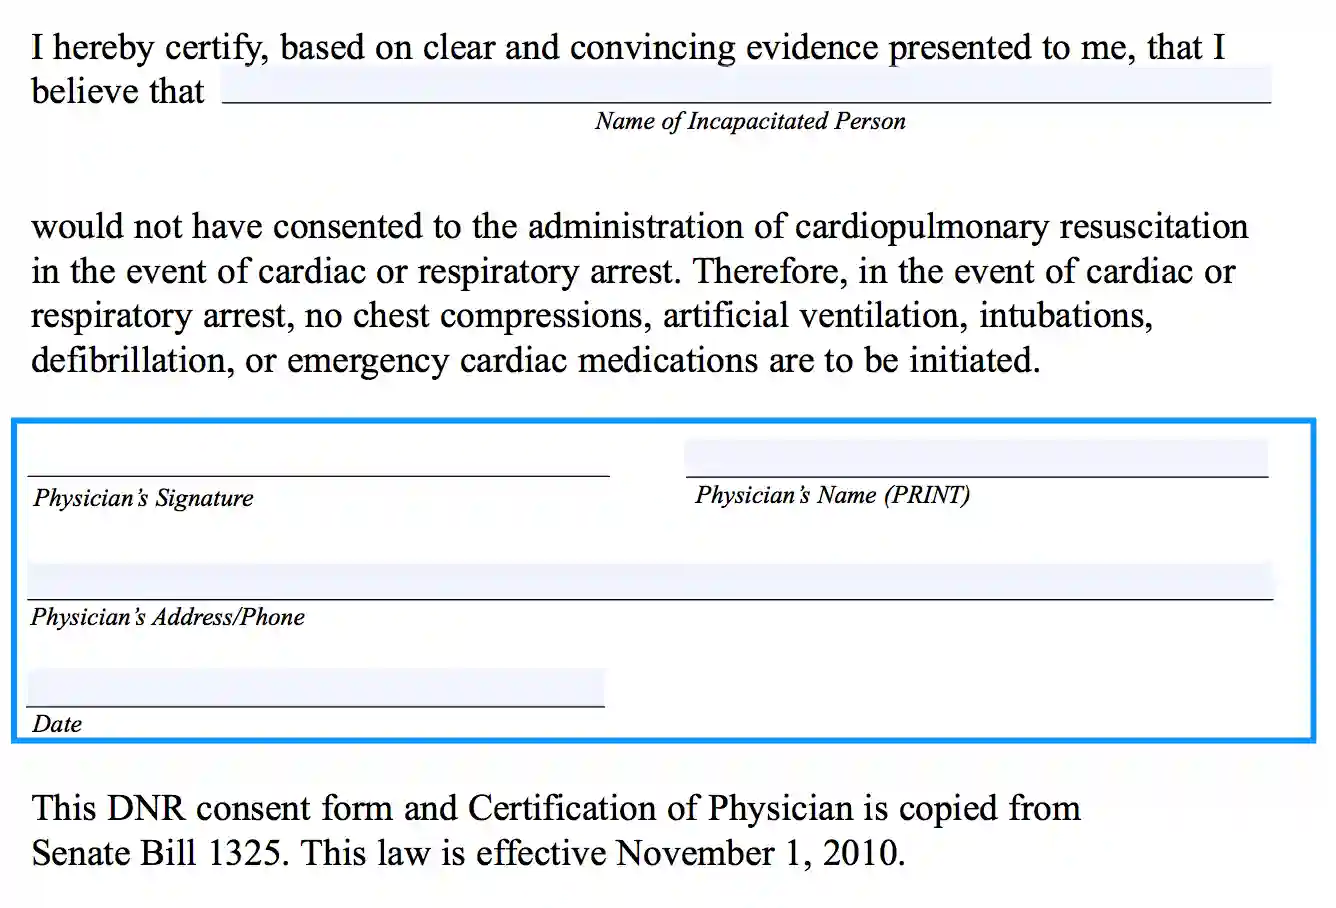 step 2.2 to filling out the oklahoma dnr form enter the physicians information